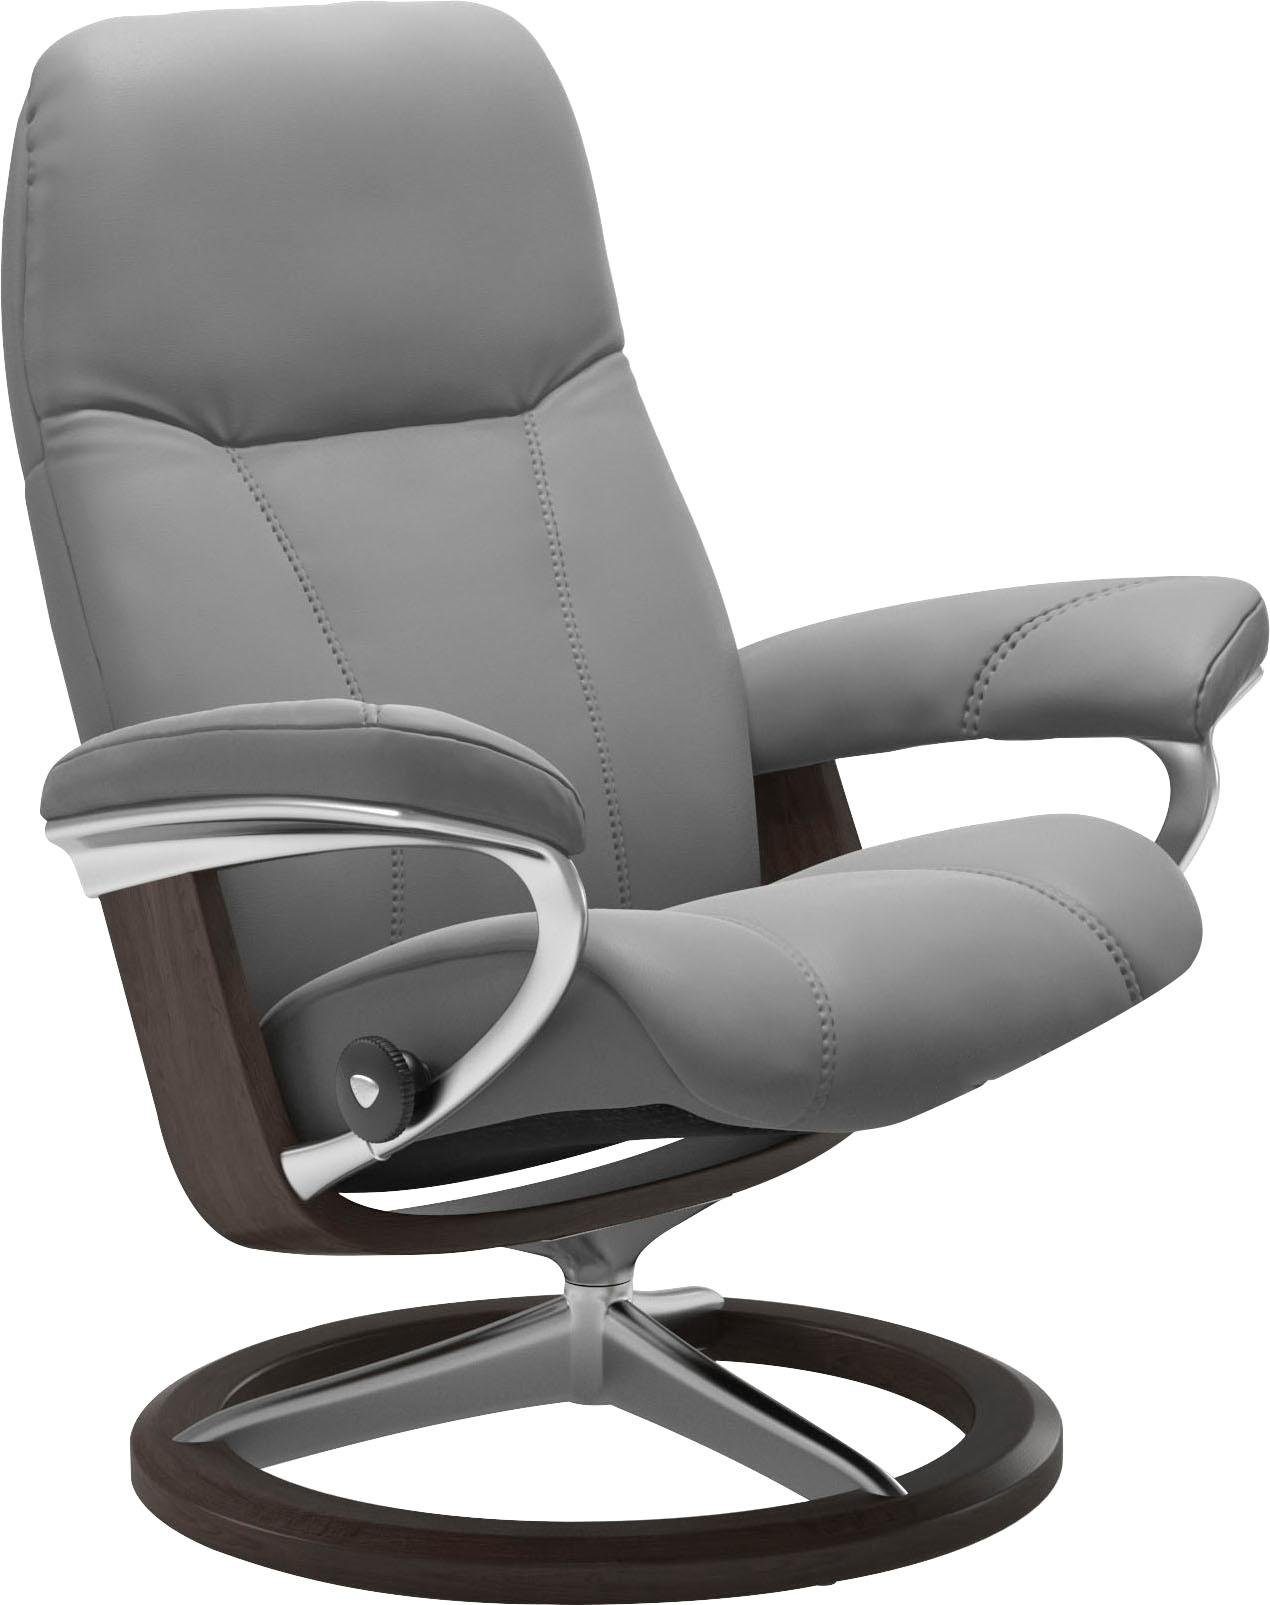 Wenge mit Signature Größe Stressless® L, Gestell Consul, Base, Relaxsessel